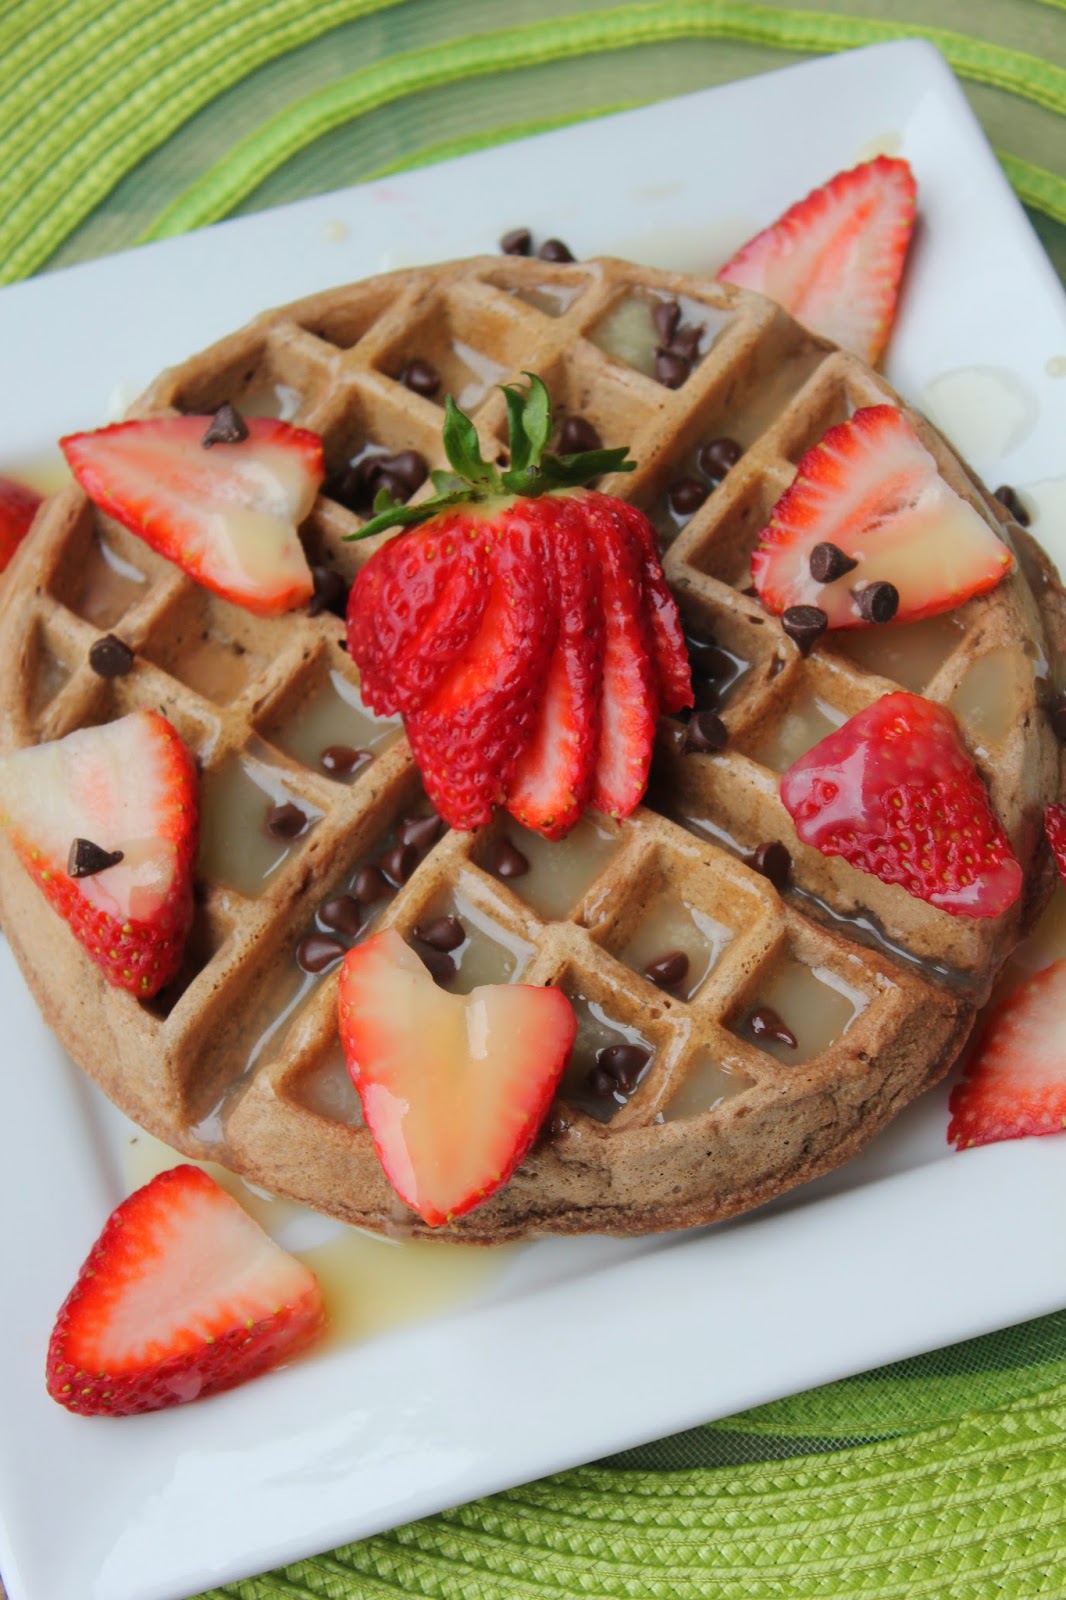 Recipe: Breakfast, Recipe: Bread, chocolate waffles, double chocolate waffles, strawberries, specialty syrup, butter syrup